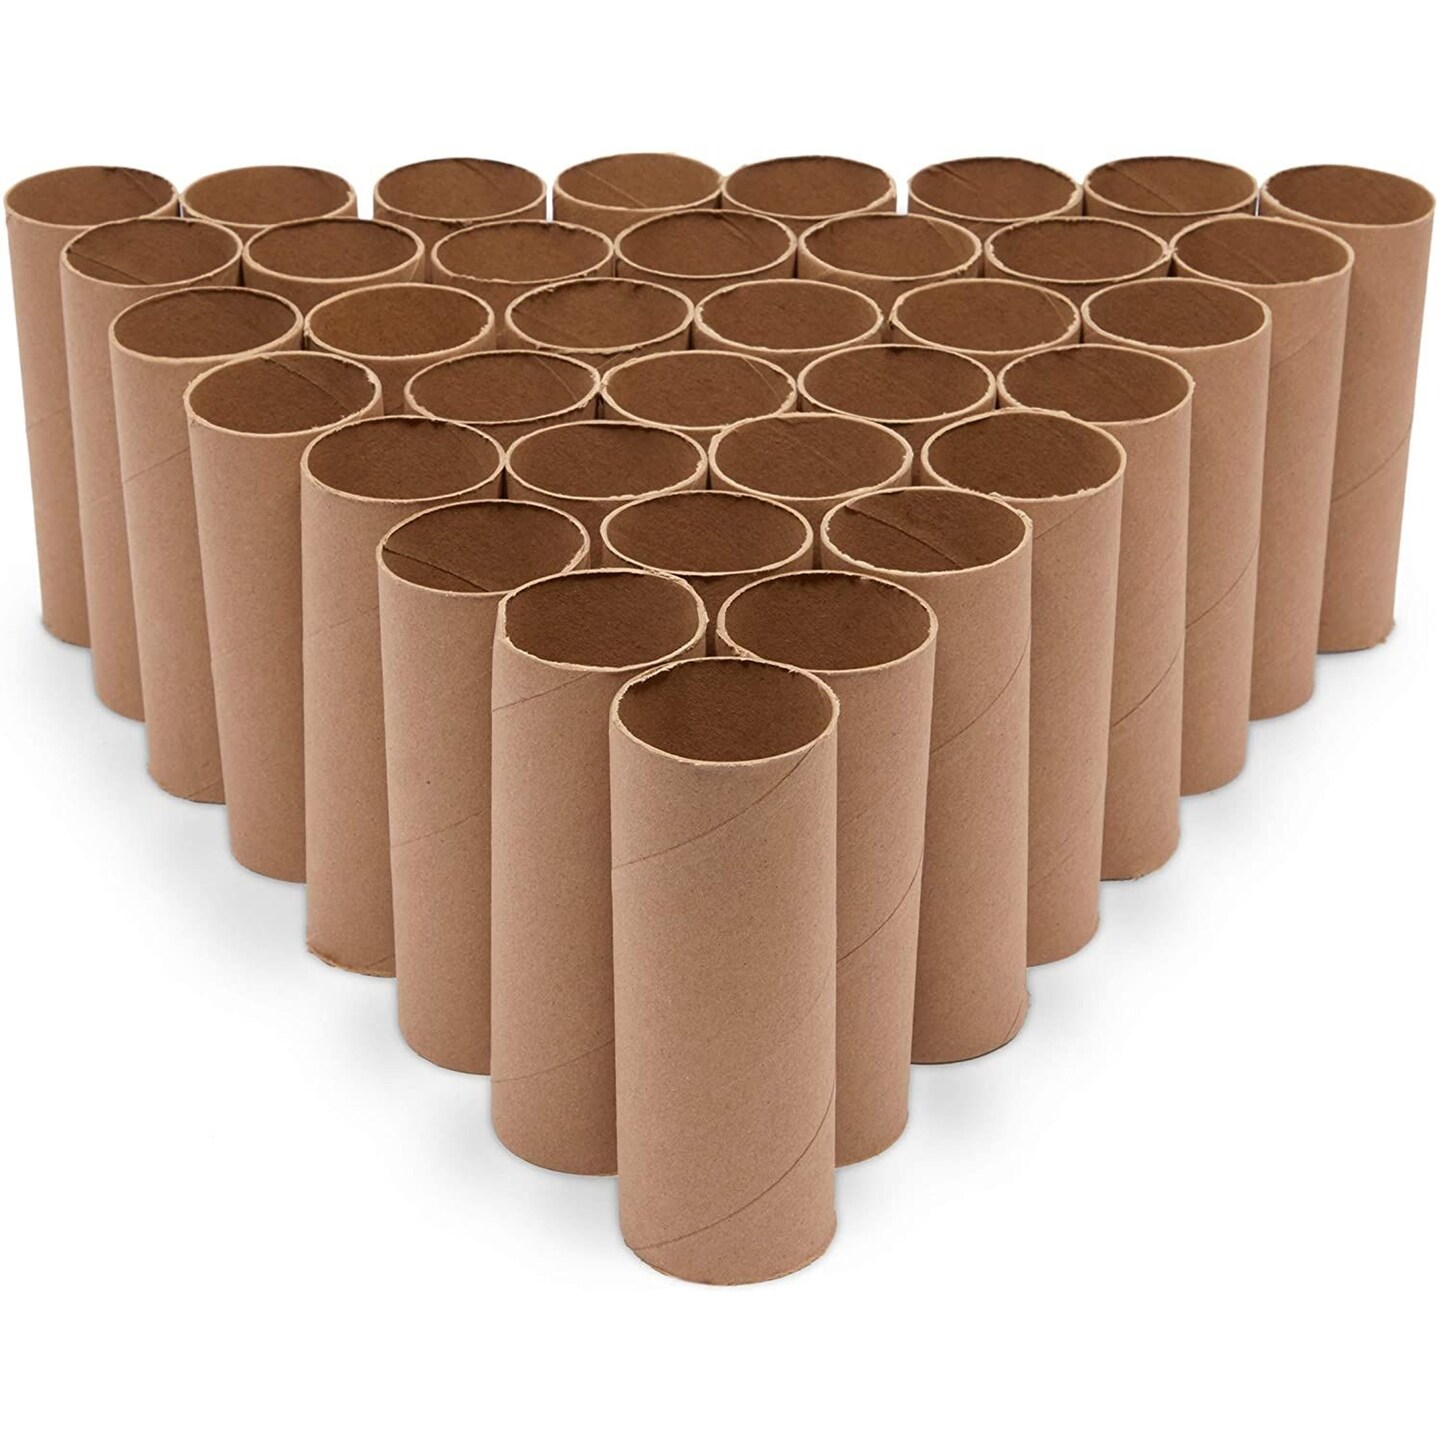 36 Pack Brown Cardboard Tubes for Crafts, DIY Craft Paper Roll for Diorama (1.6 x 4.7 In)